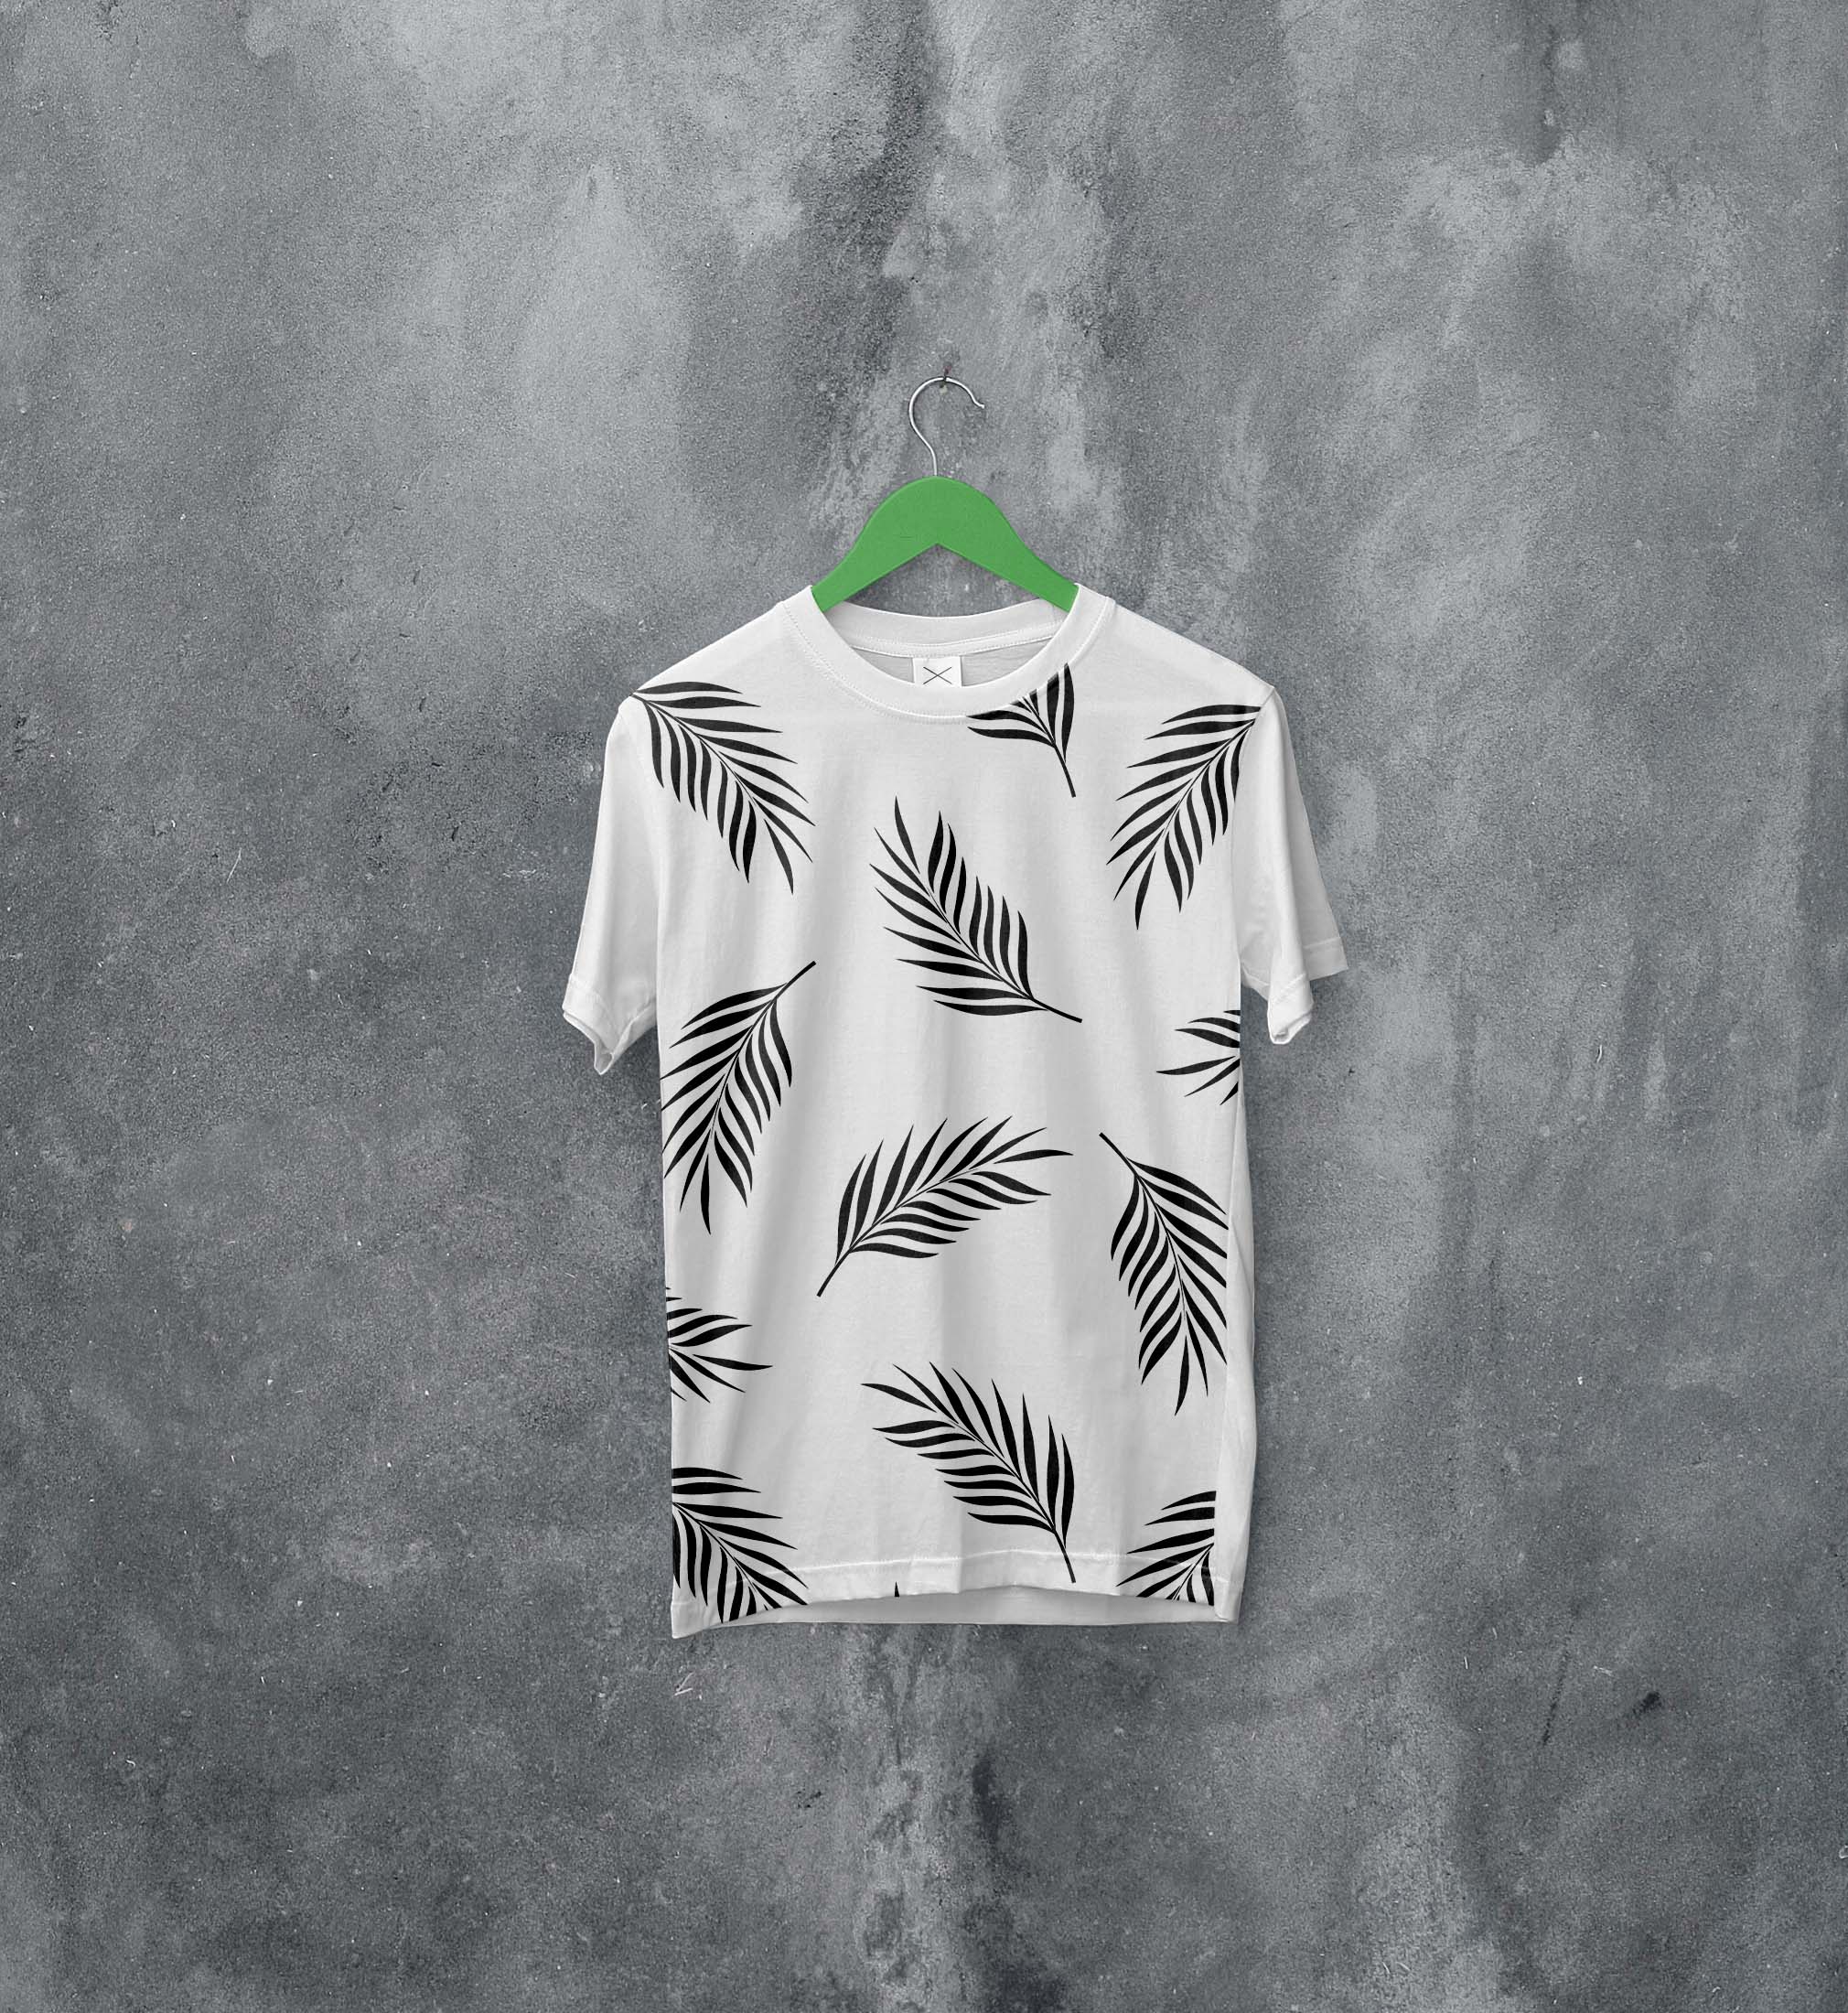 White t - shirt with black leaves on it.